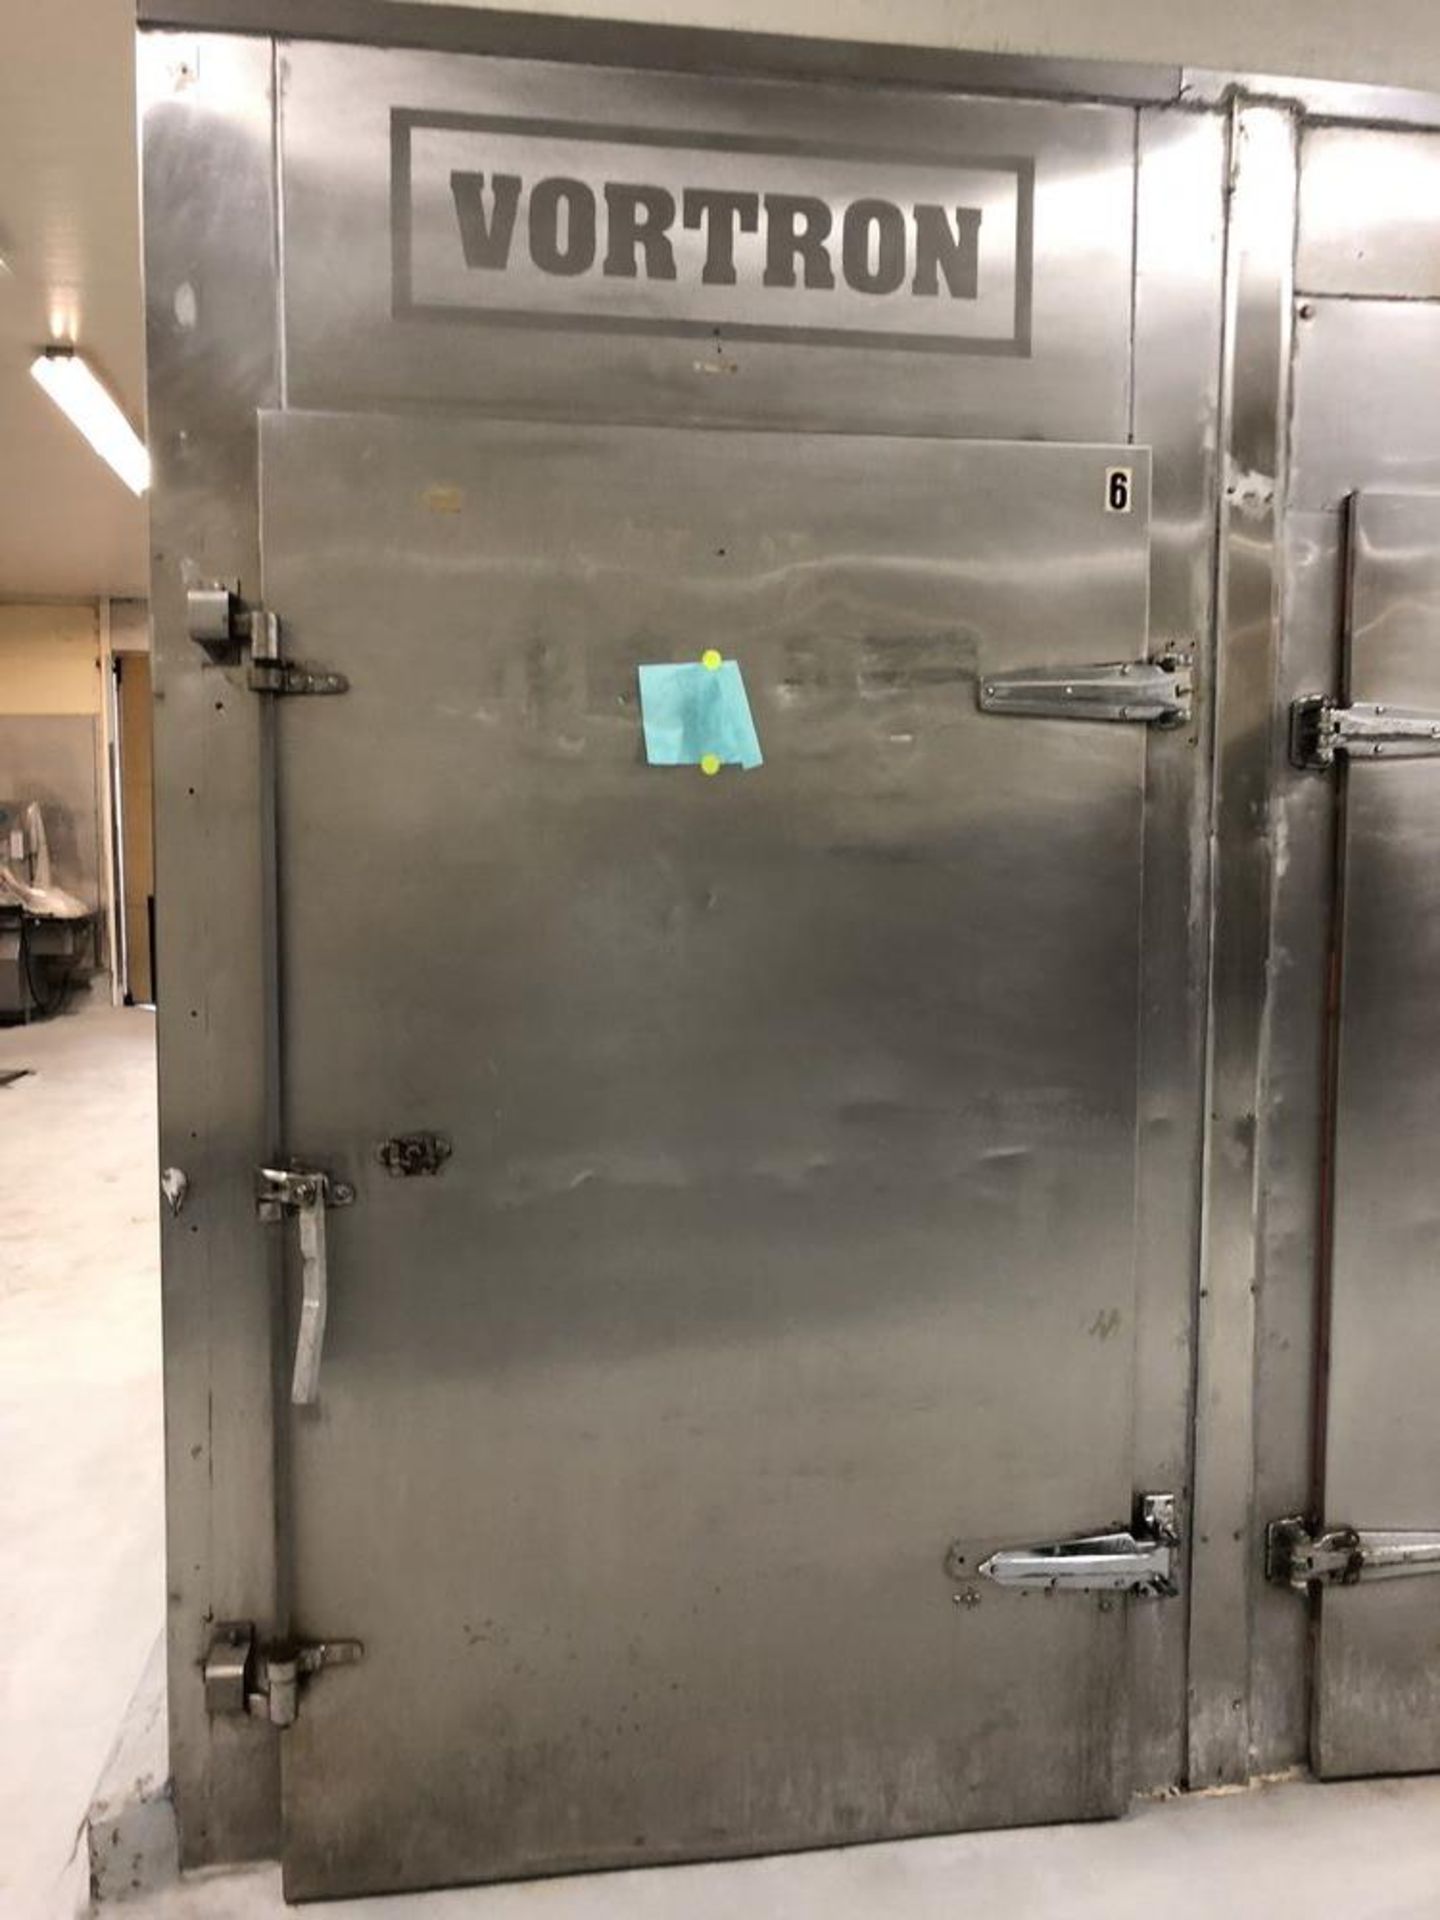 Vortron S/S Double Rack Electric Oven, Internal Dims.: Aprox. 8'2" L x 4'2" W x 6' 3" H, Overall